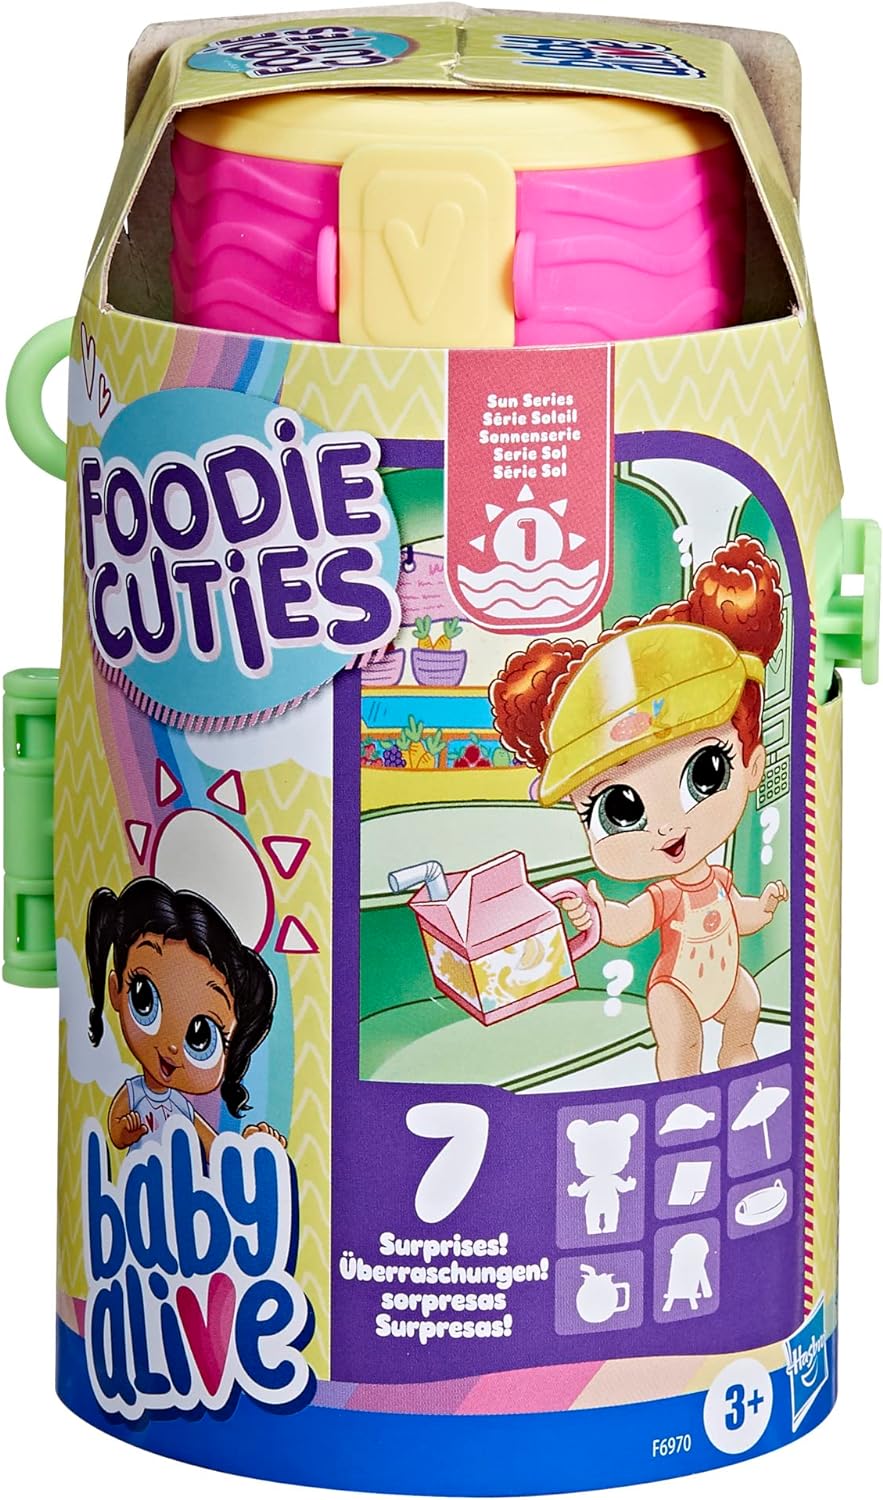 Baby Alive Foodie Cuties Bottle w/ 3" Doll & 7 Surprises (Sun Series 1) $3.56 + Free Shipping w/ Prime or on $35+